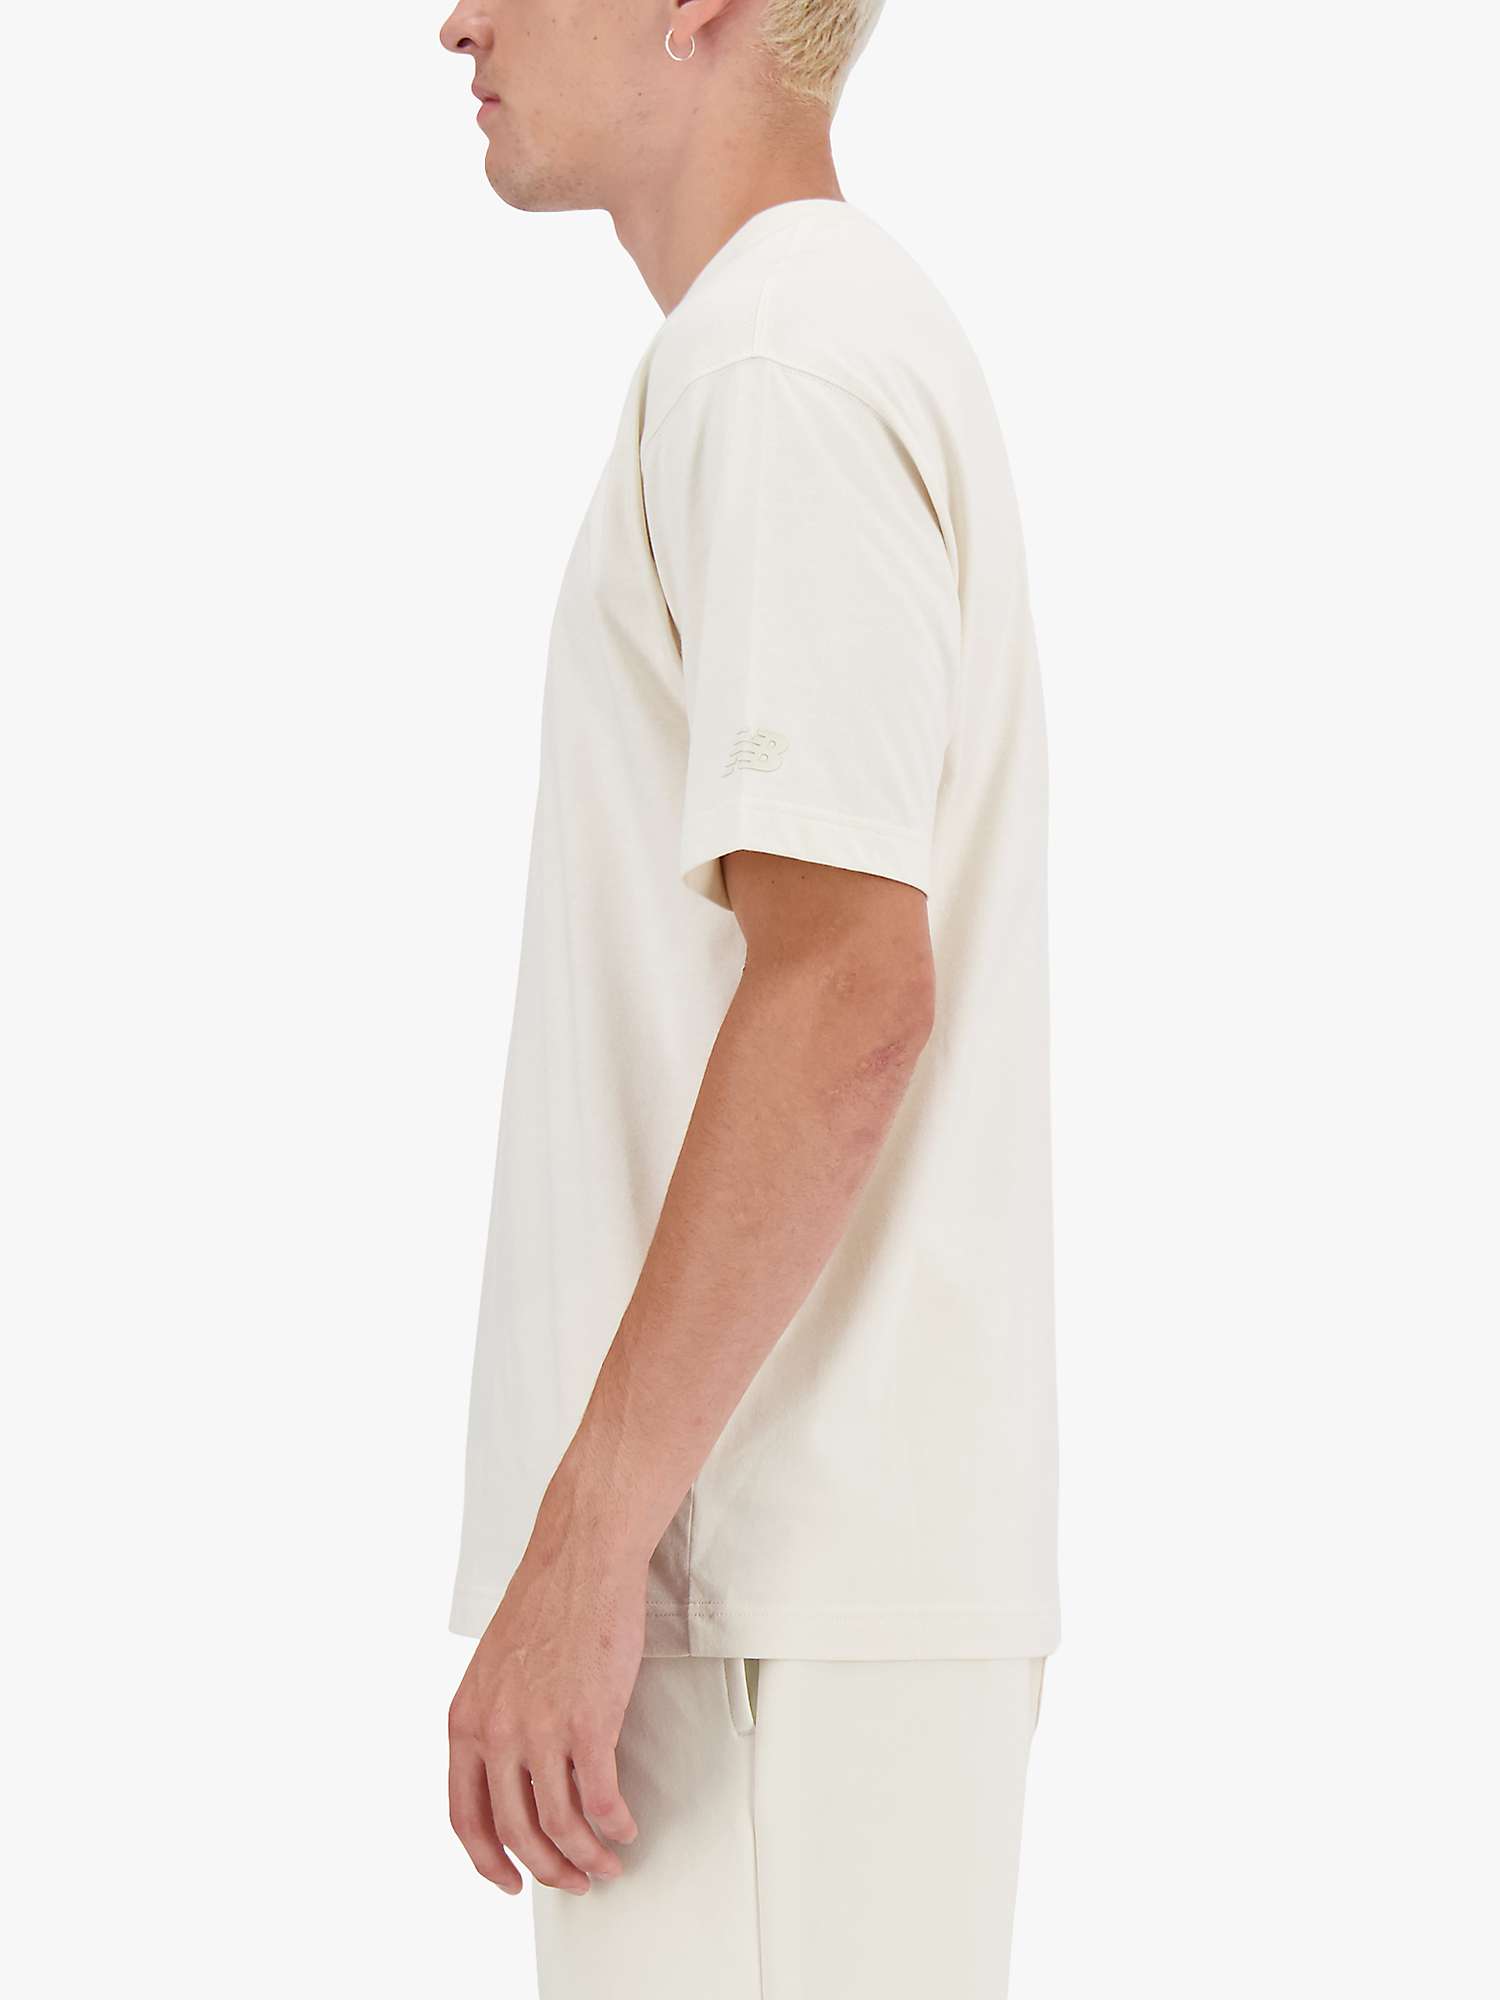 Buy New Balance Shifted Printed T-Shirt, Cream Online at johnlewis.com